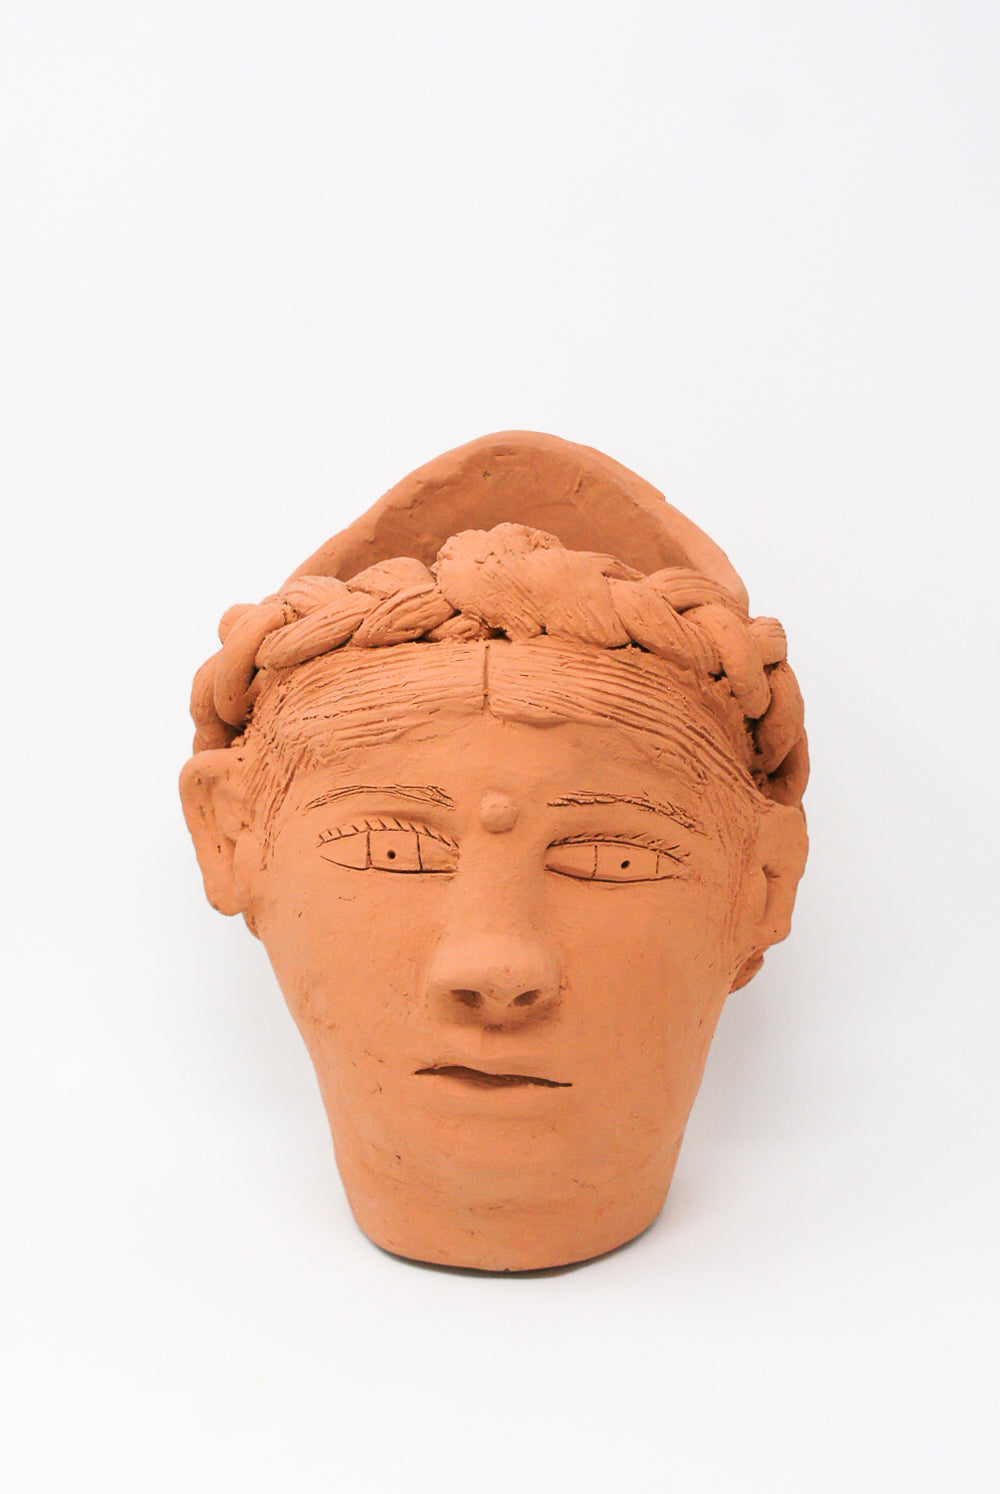 A large Head Planter in Terracotta from Oaxaca, featuring braided hair and intricate facial details by Travel Find.